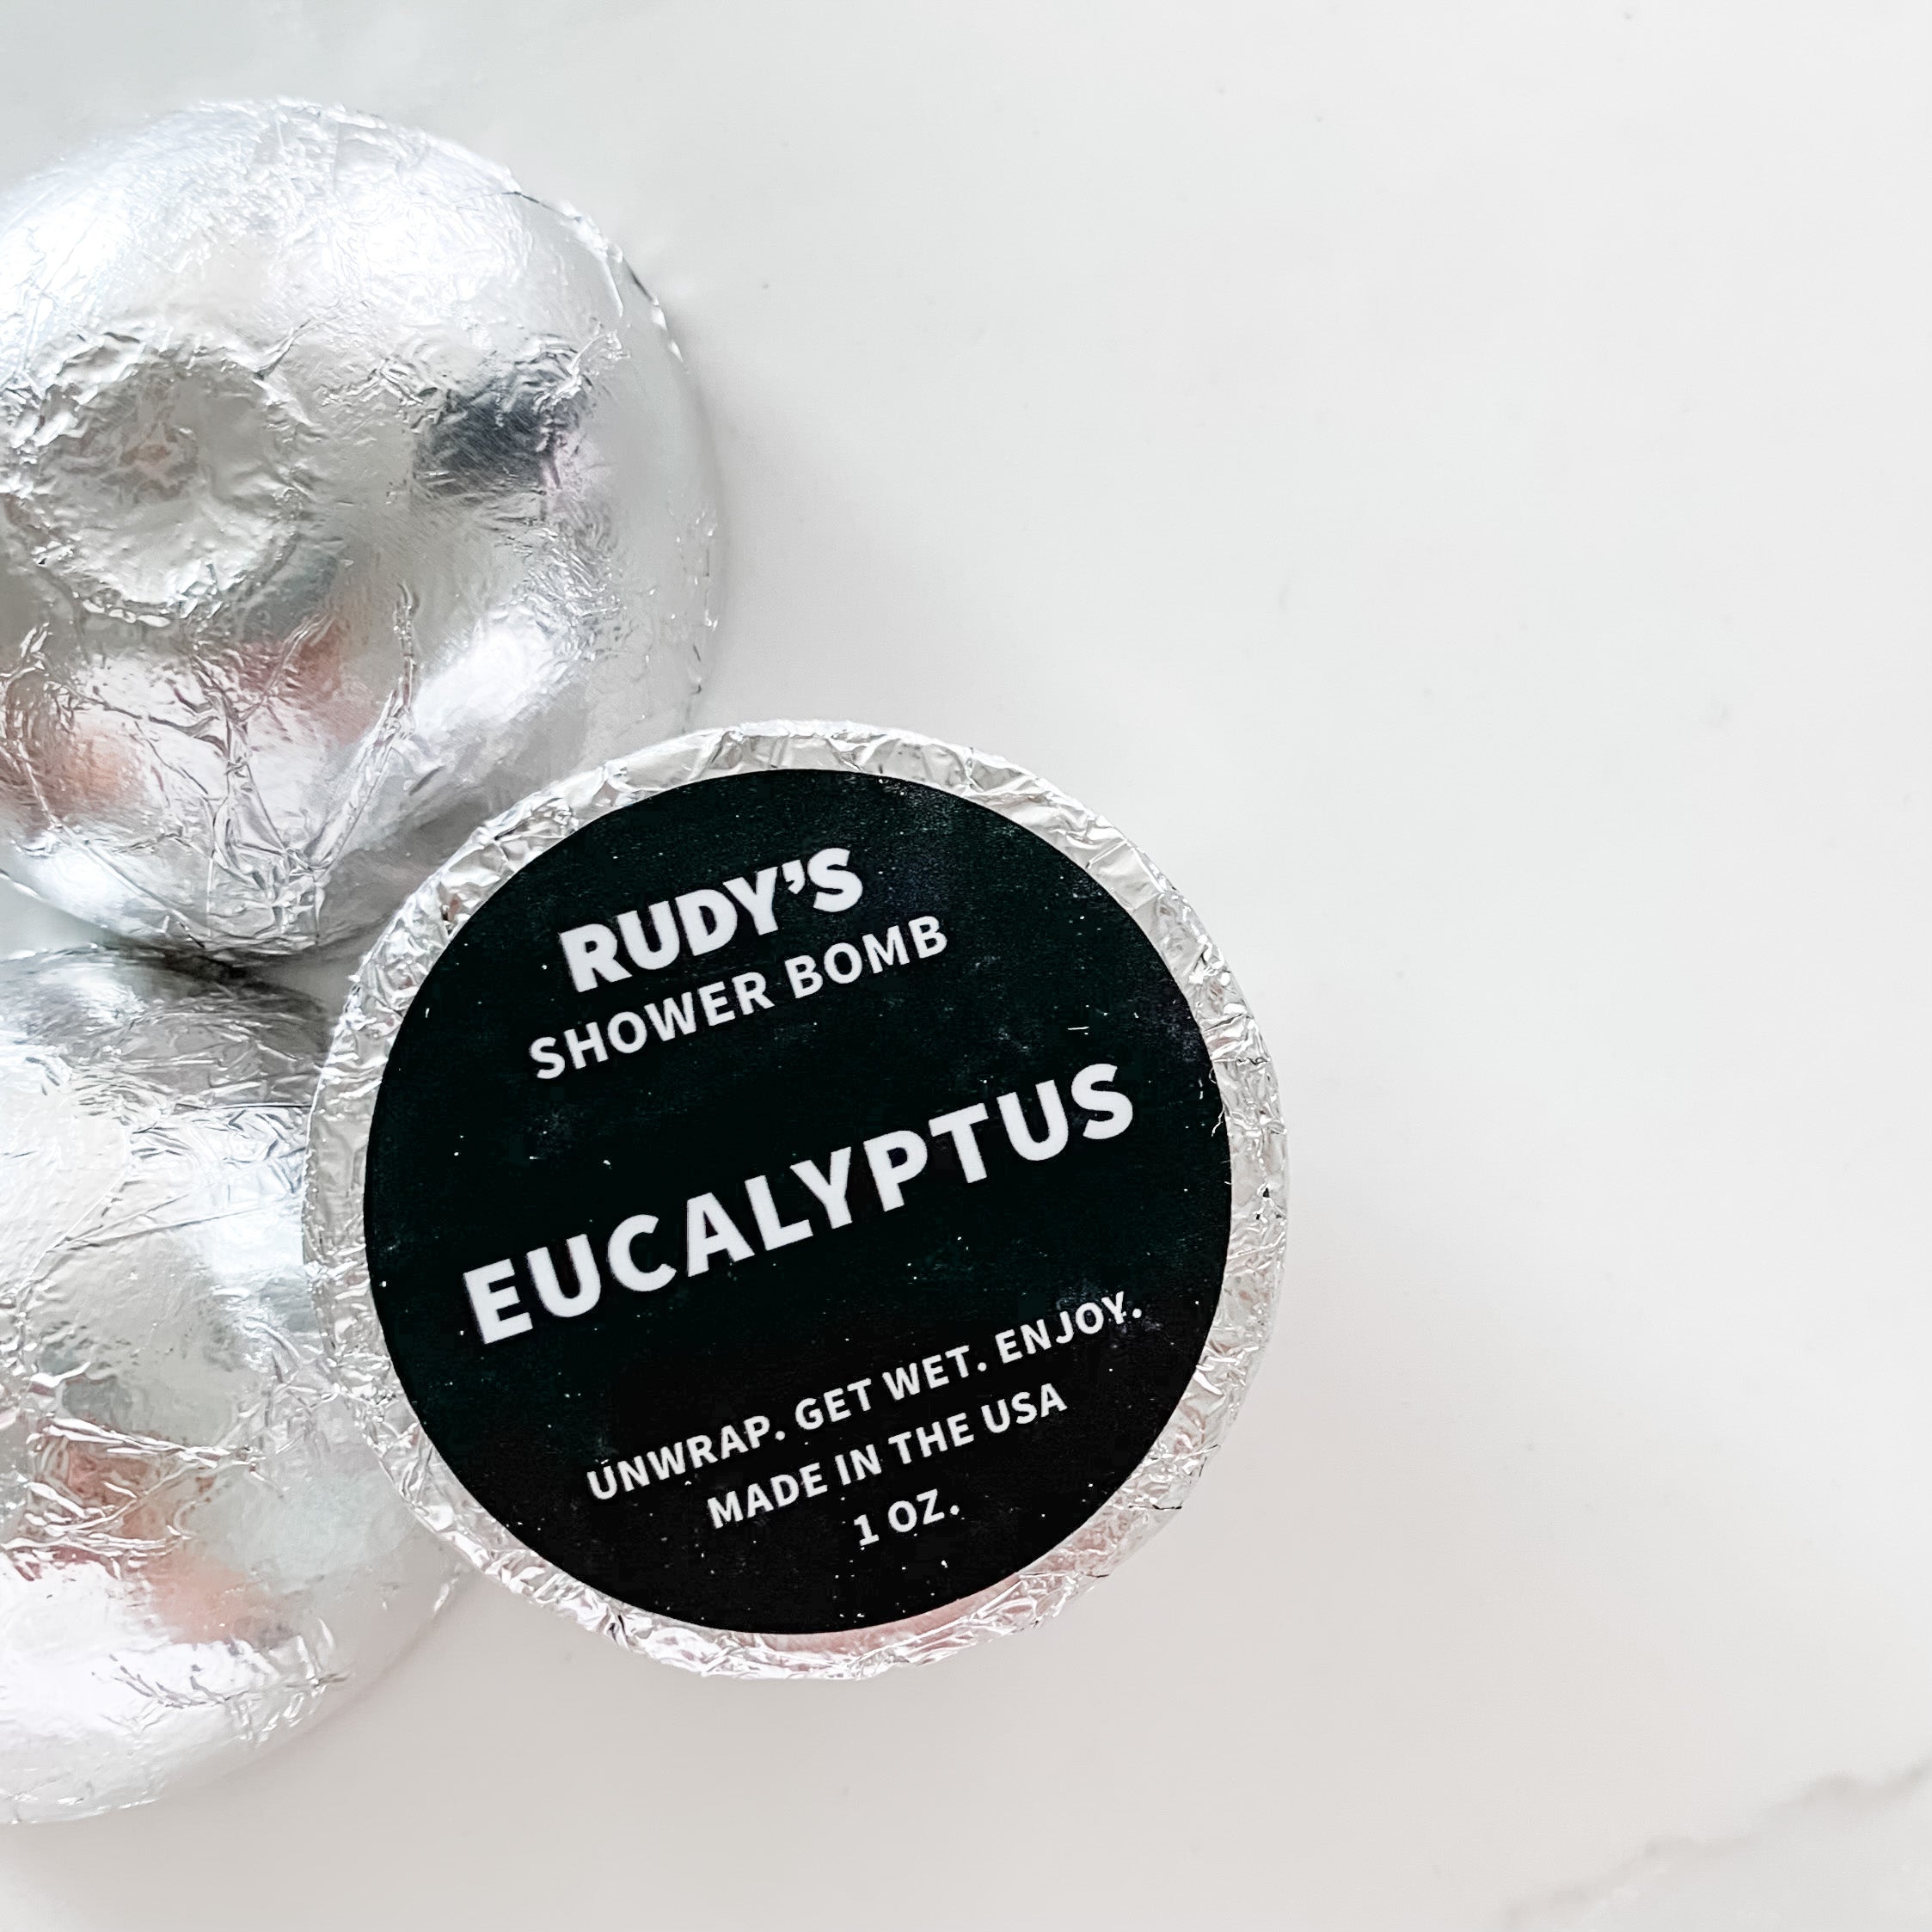 Three Rudy's shower bomb in silver foil packaging with black sticker shown on one.